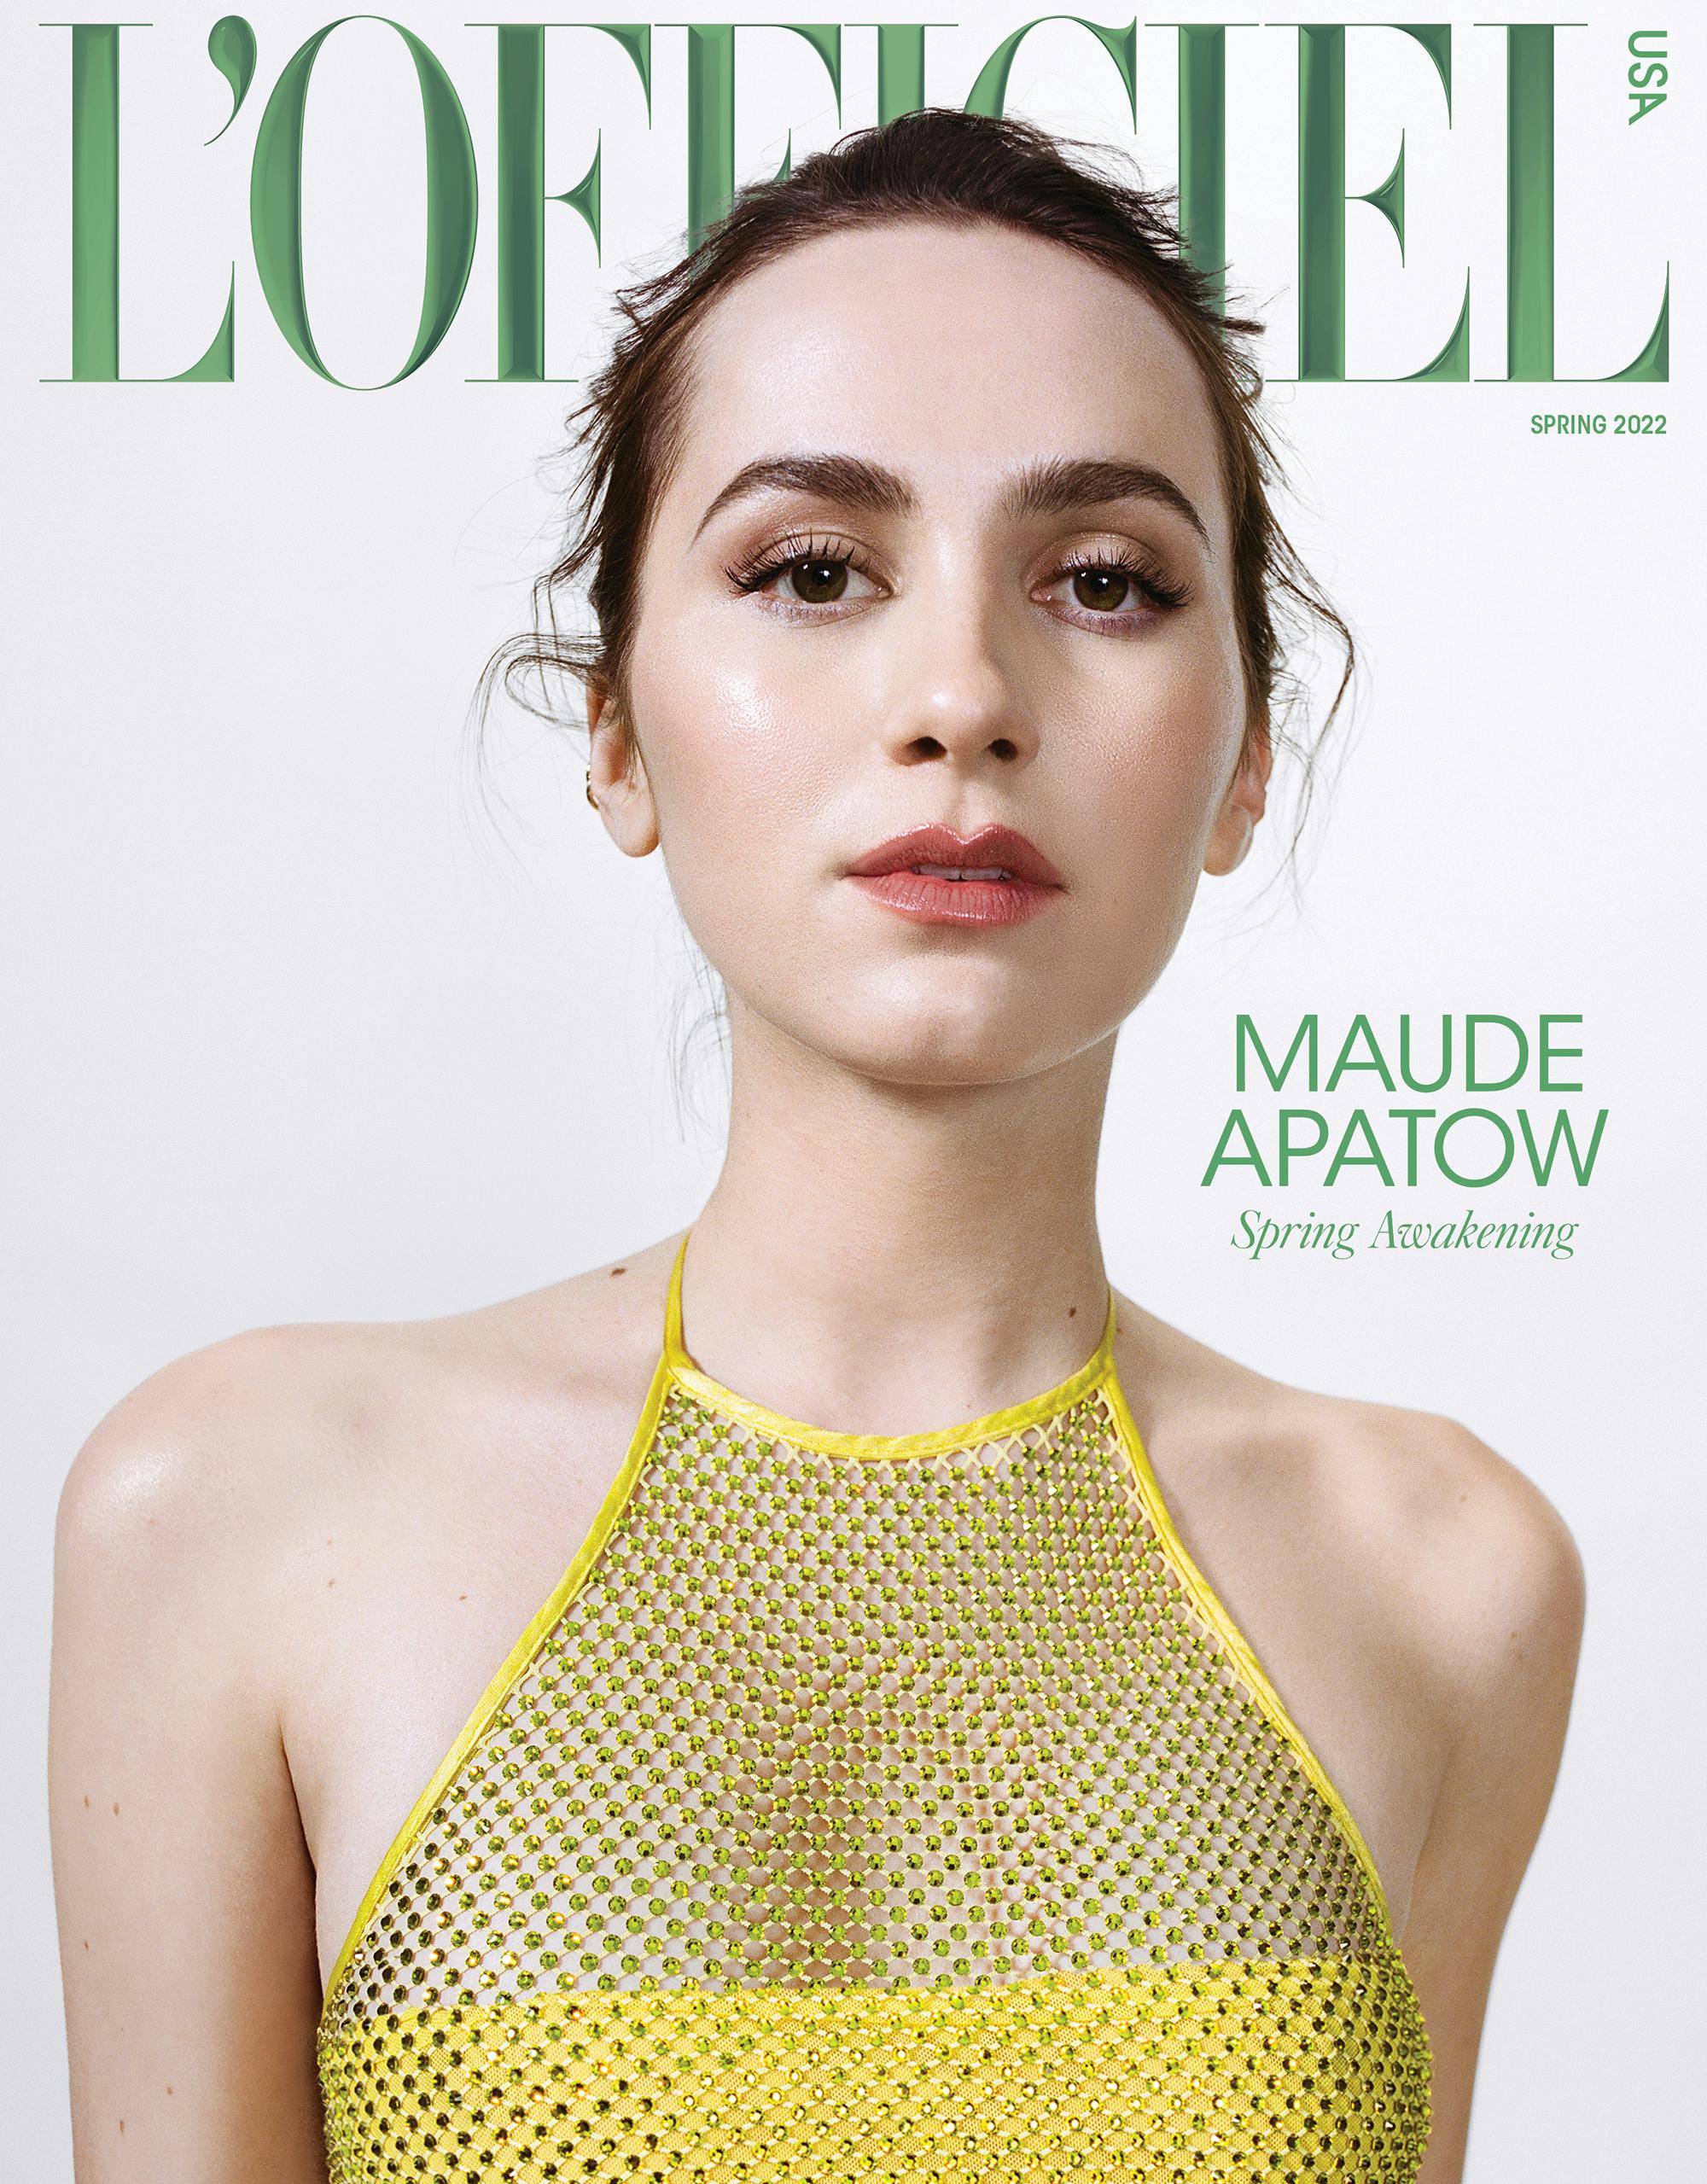 Maude Apatow cover shoot and interview